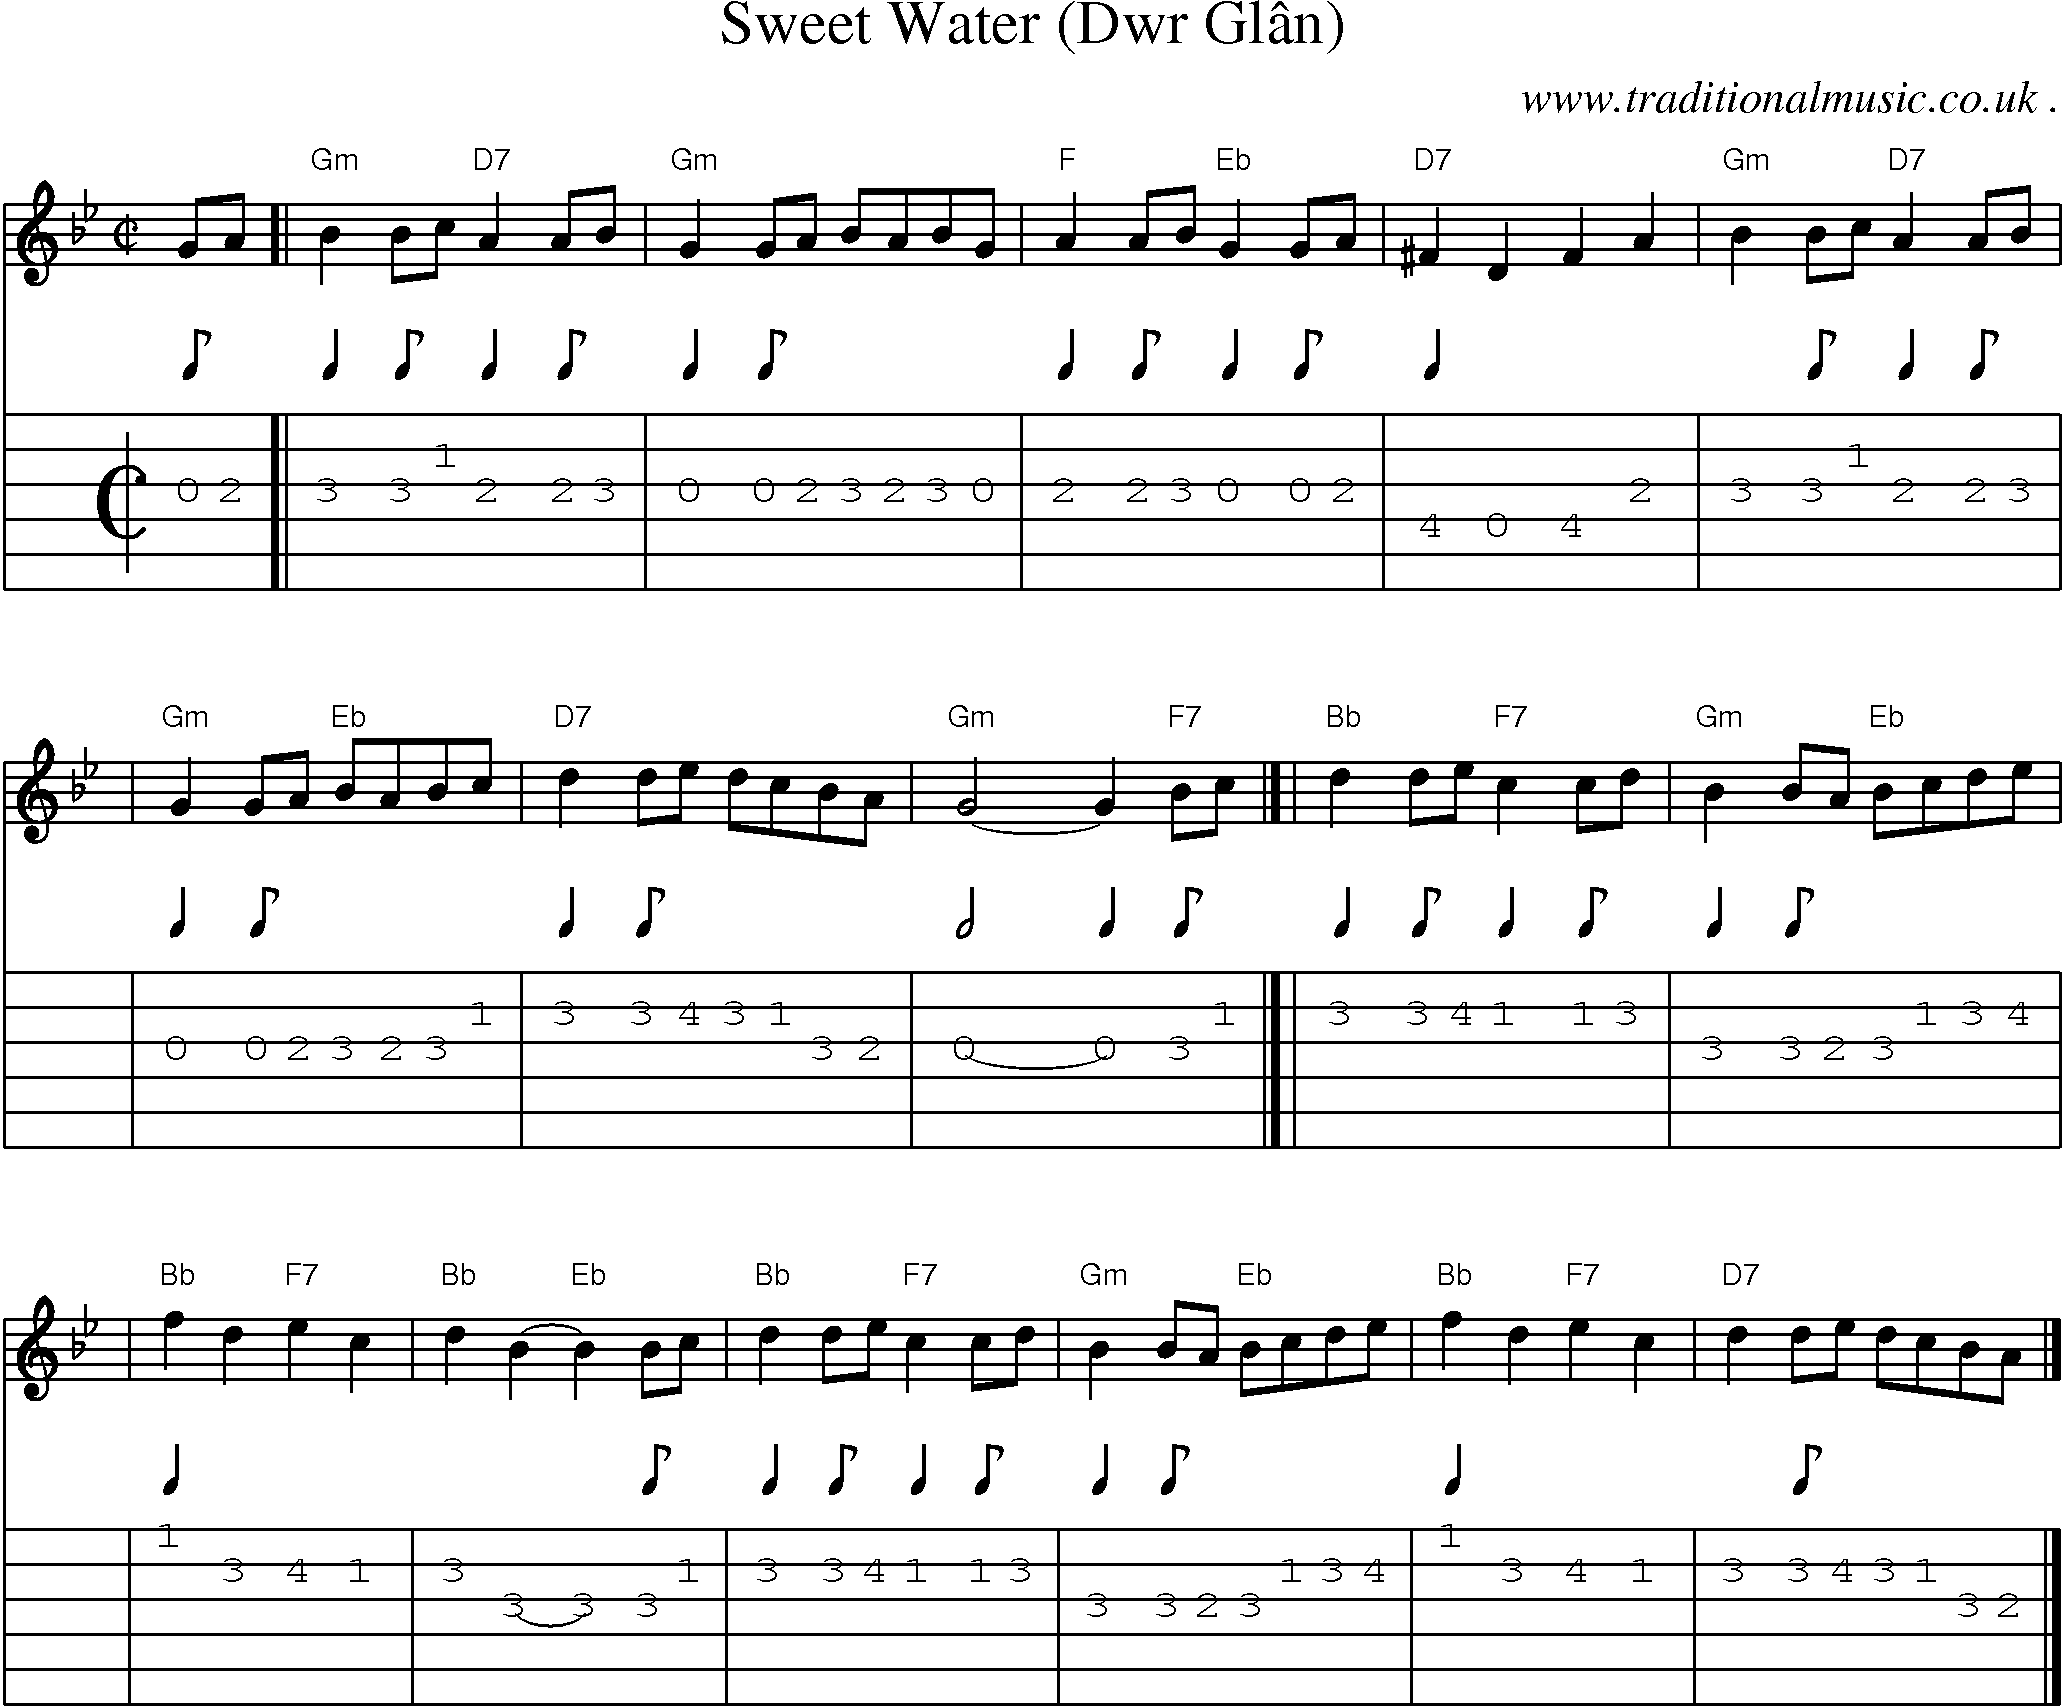 Sheet-music  score, Chords and Guitar Tabs for Sweet Water Dwr Glan